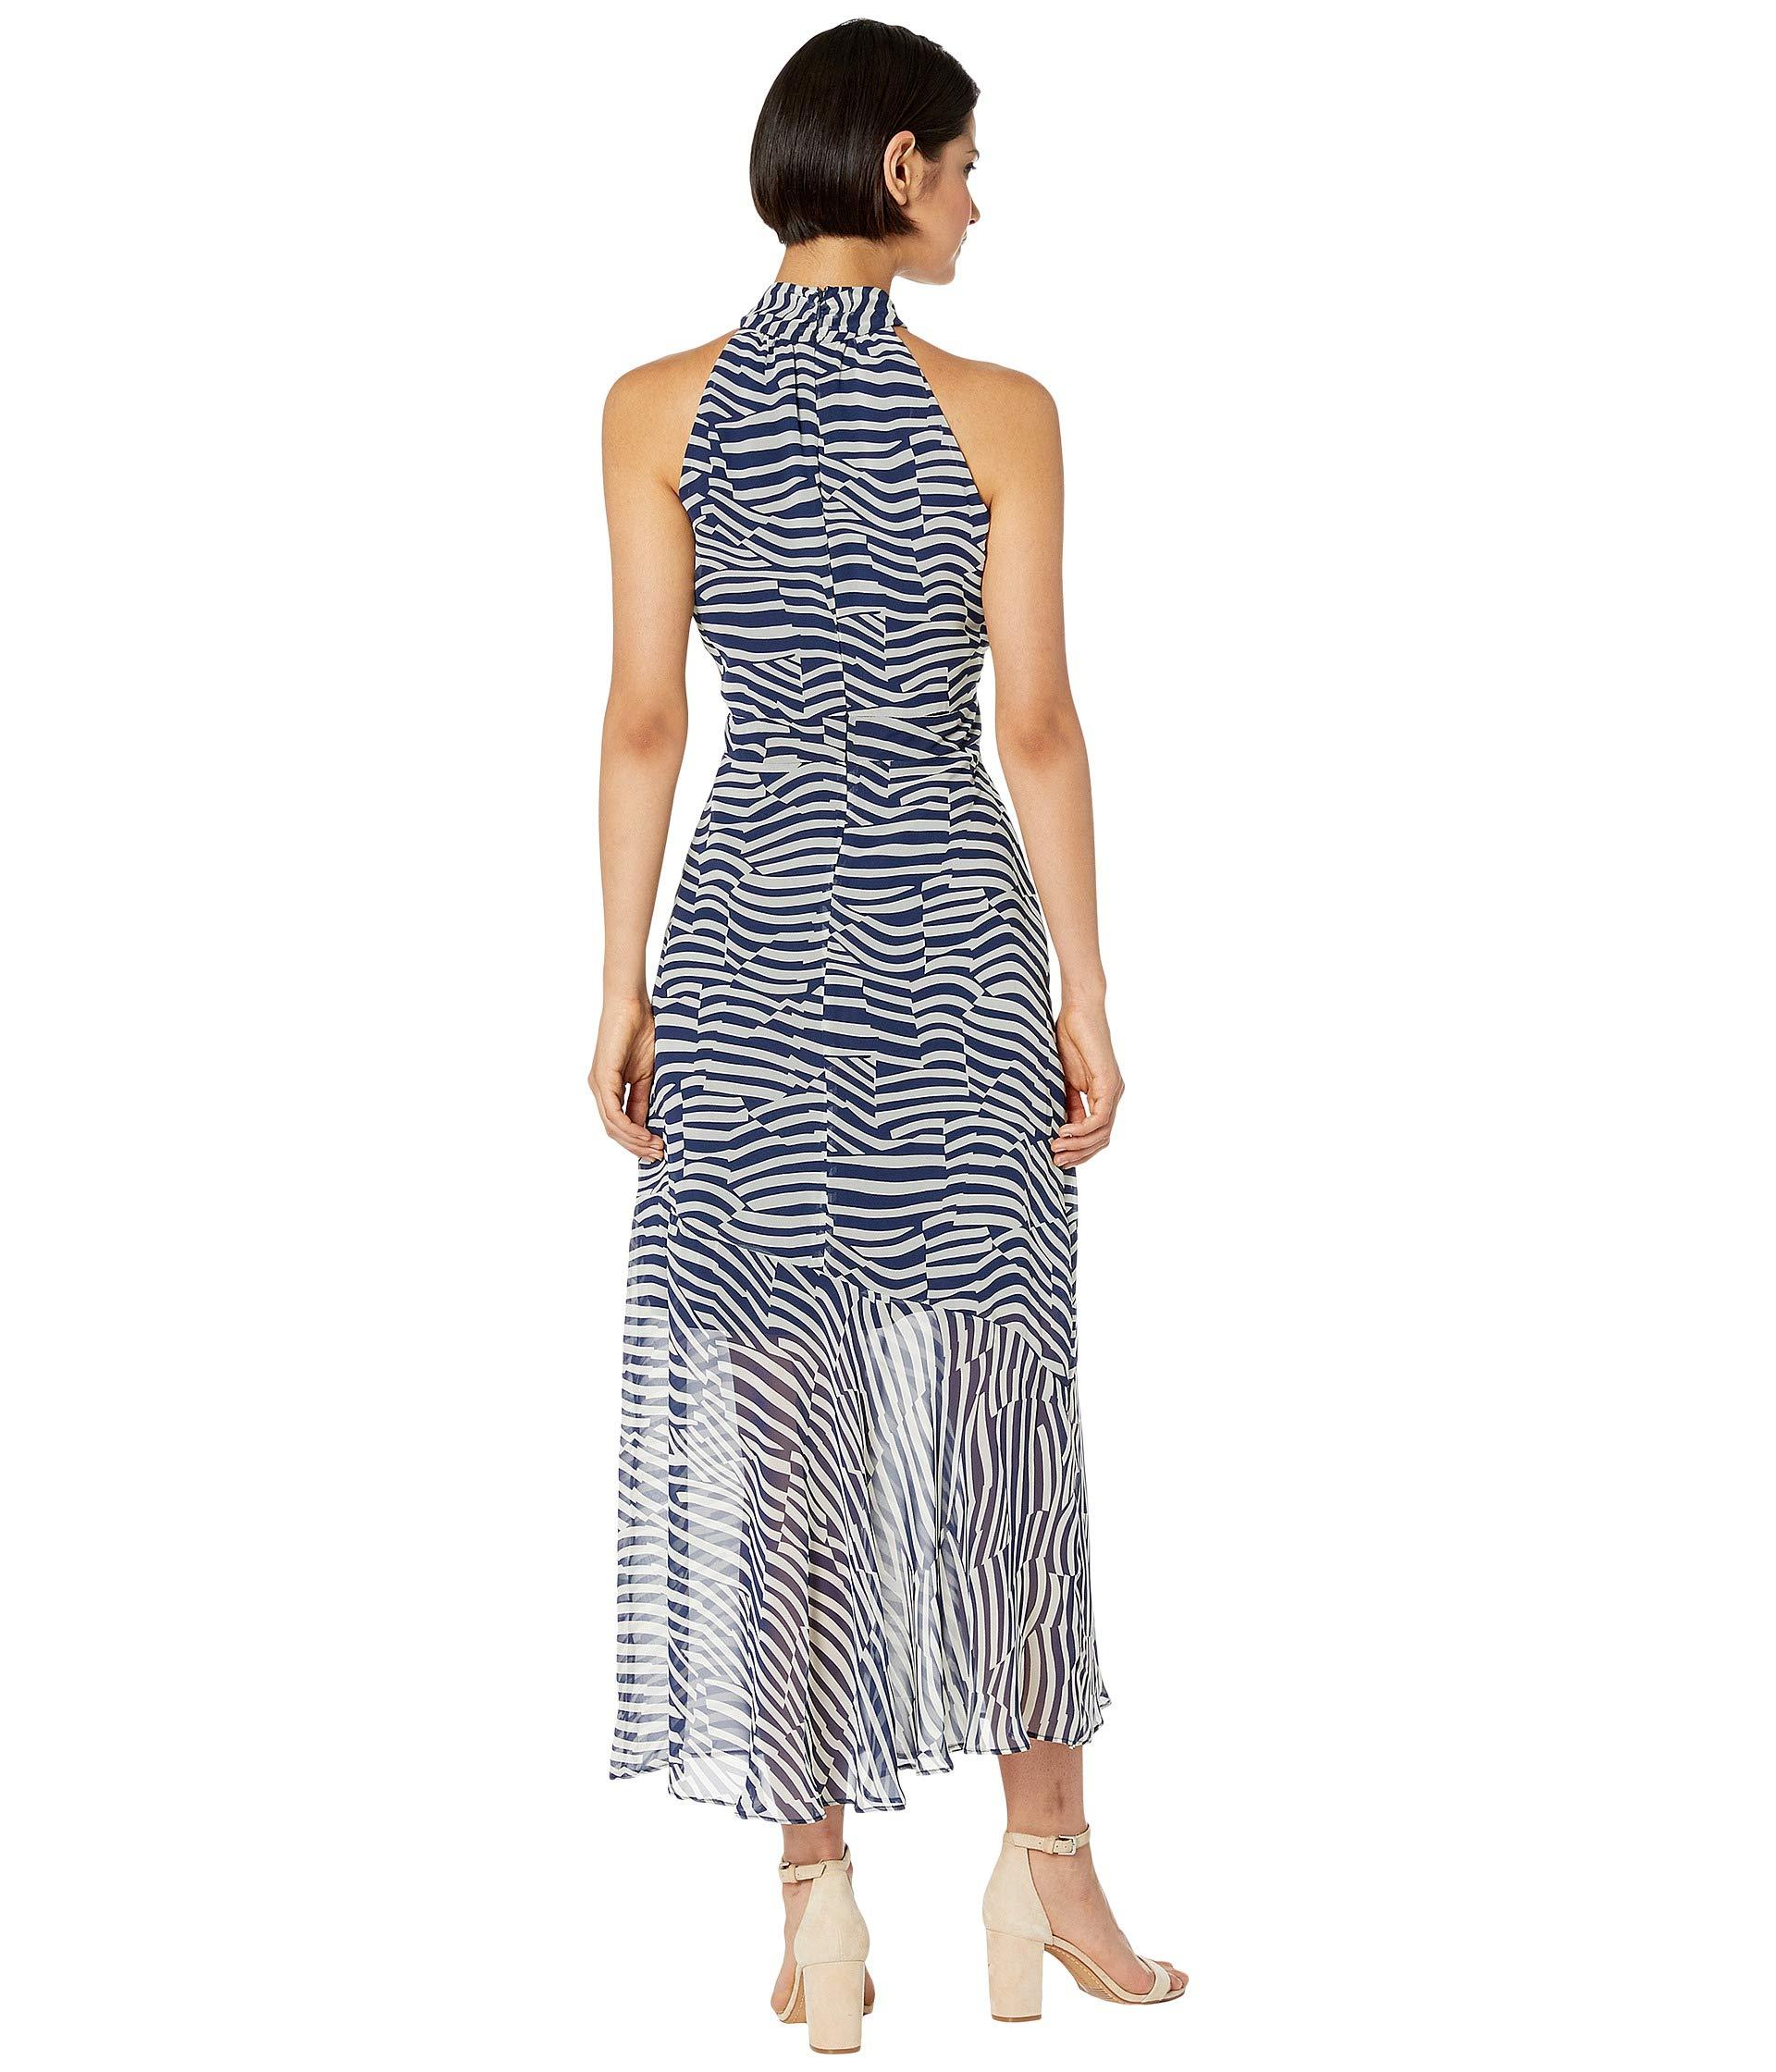 Sam Edelman Synthetic Printed Illusion Dress in Navy/Ivory (Blue) - Lyst